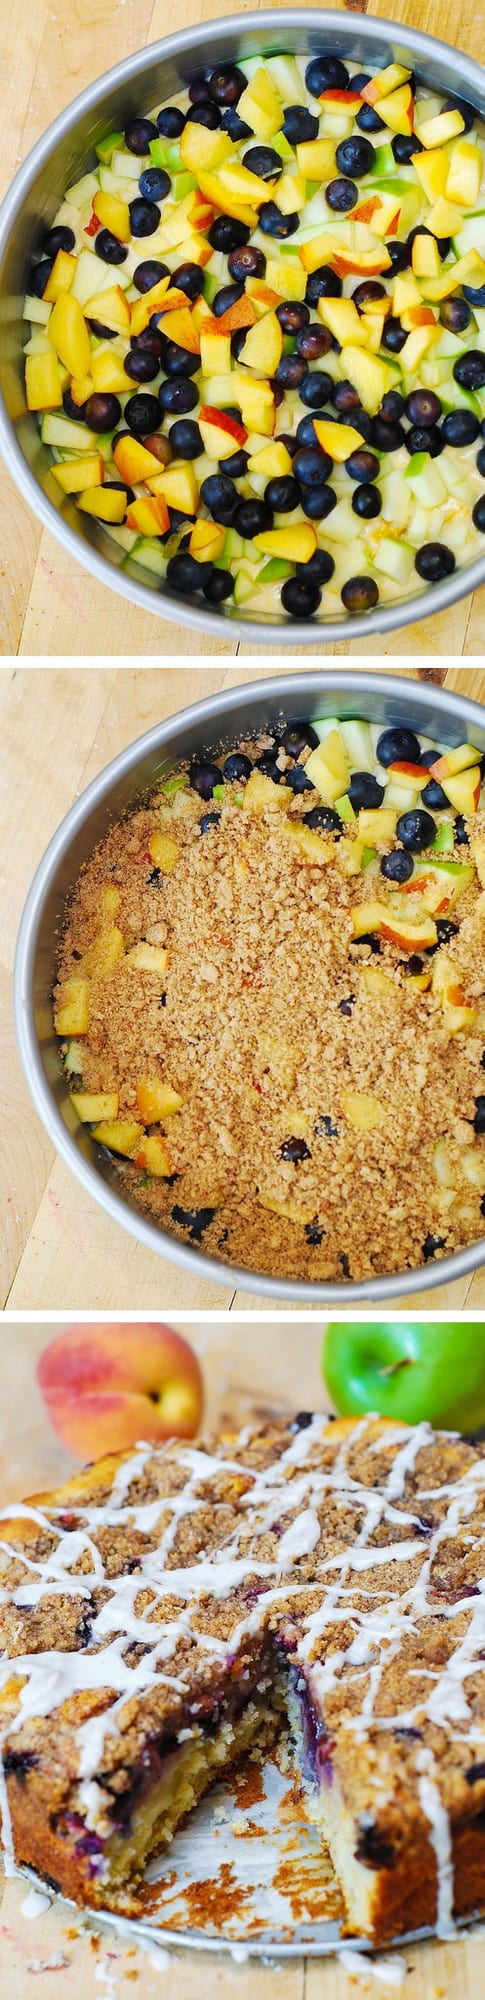 springform pan desserts, springform pan recipes, springform pan cakes, apple desserts, blueberry dessert, peach desserts, summer desserts, easy coffee cake, best coffee cake, crumb topping, streusel topping